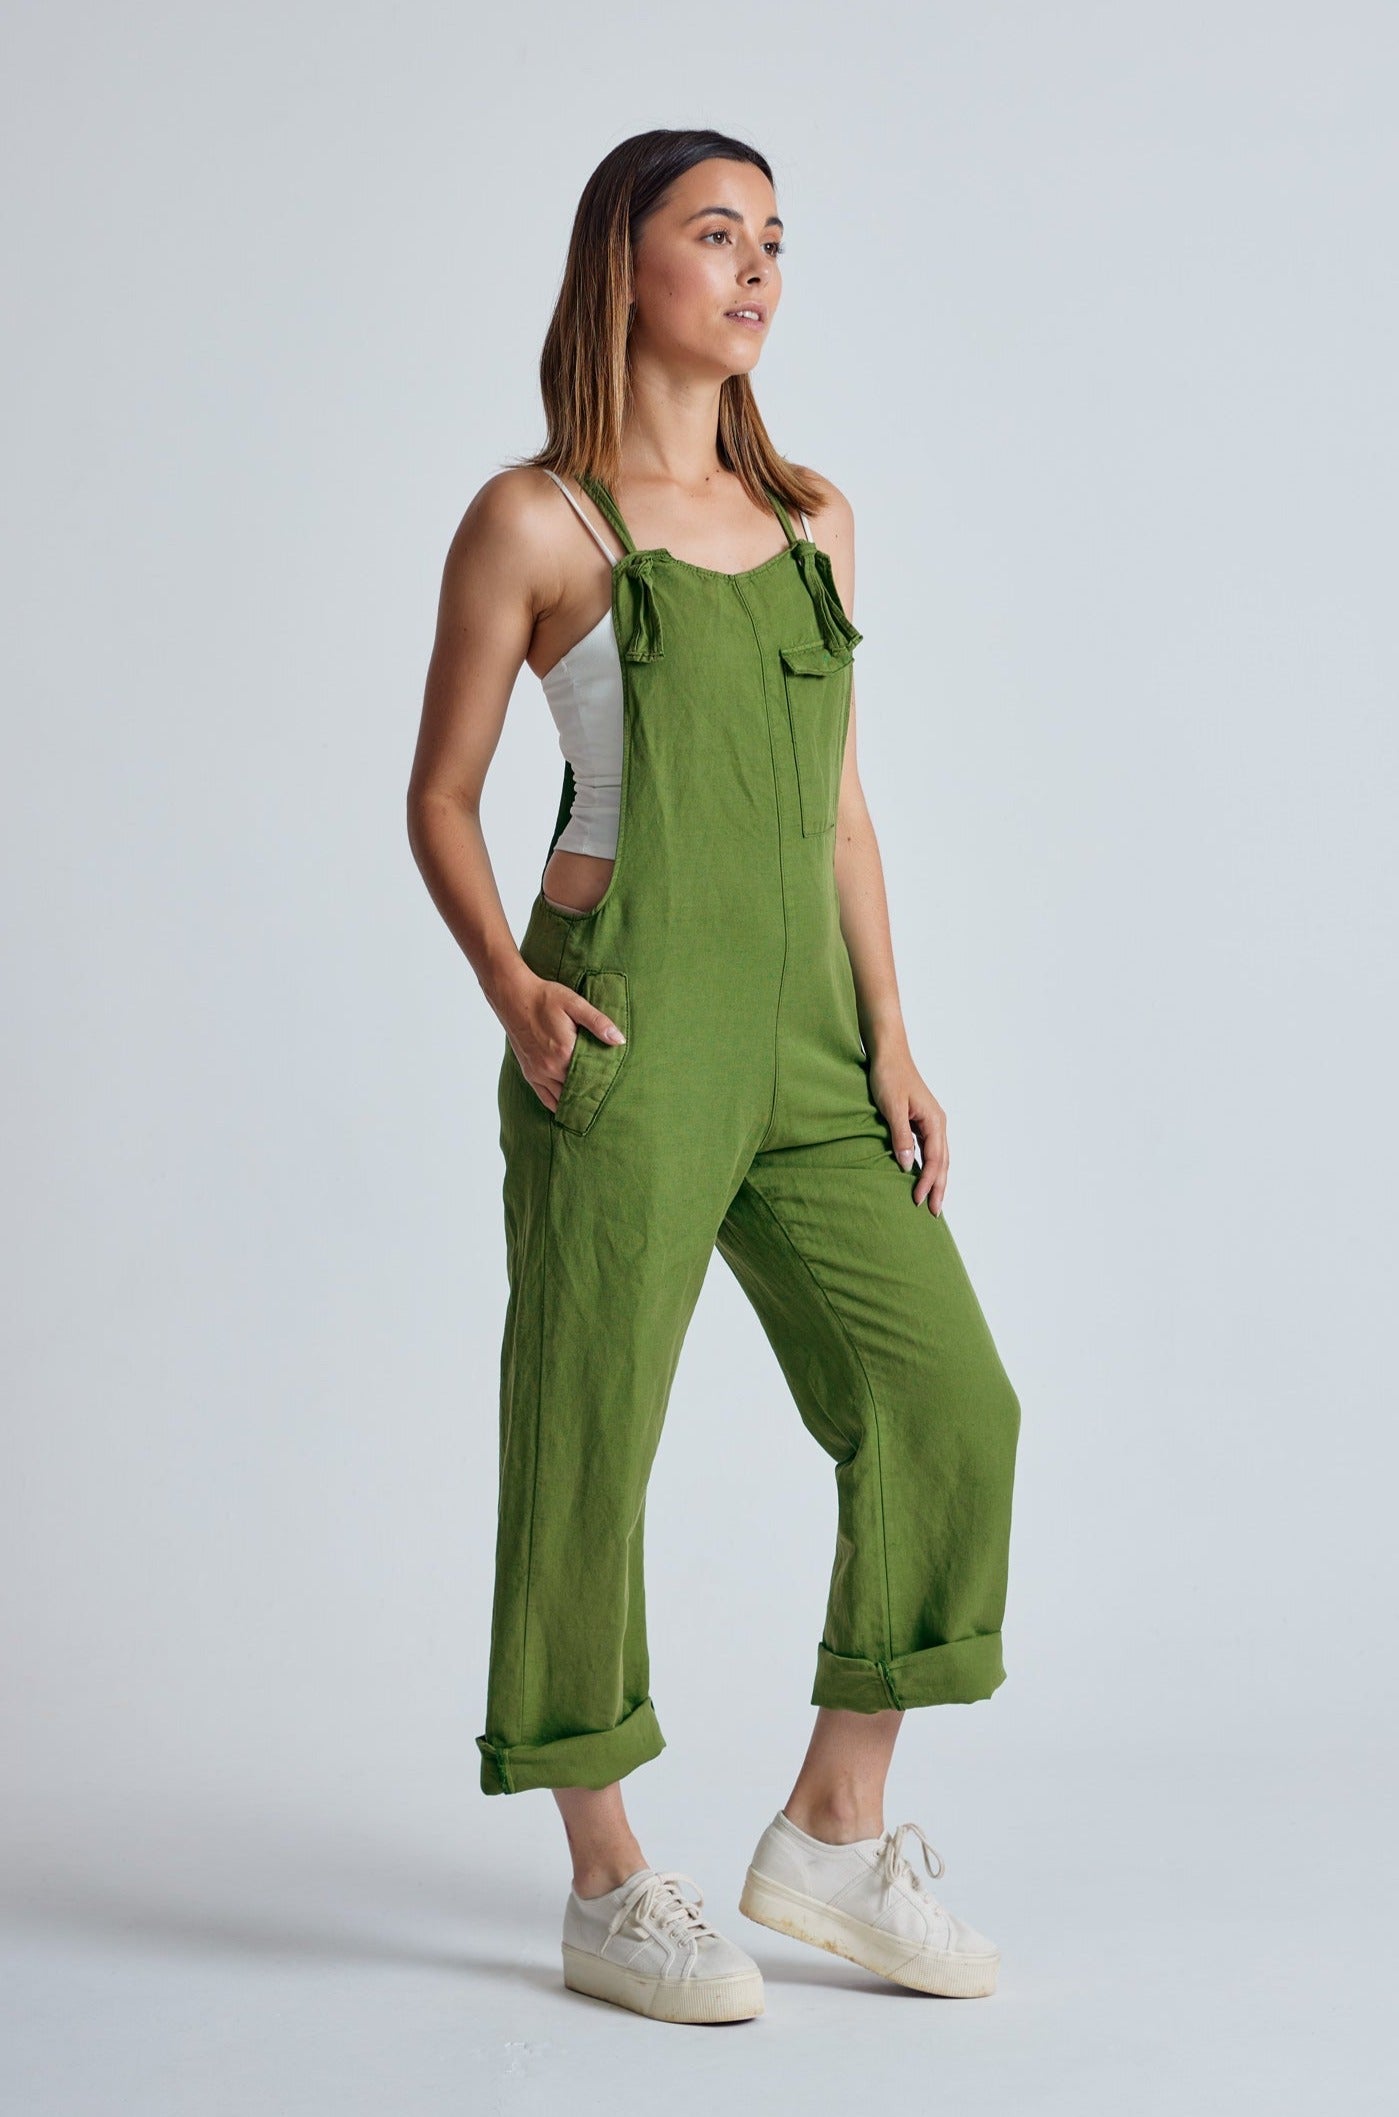 Spring Green Mary-Lou Pocket Dungaree - GOTS Certified Organic Cotton and Linen